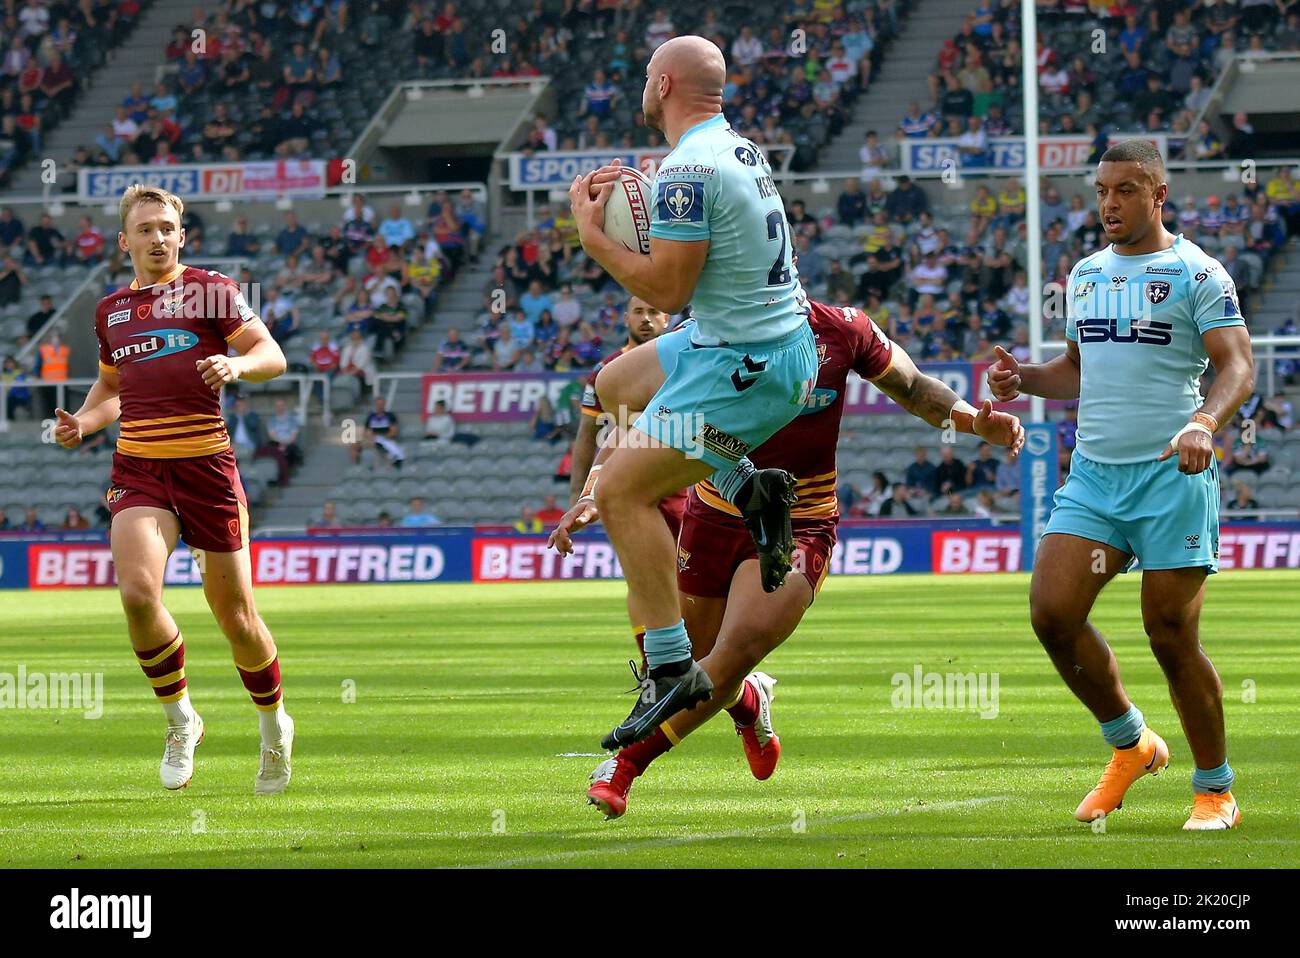 Dacia Magic Weekend 2021, Super League Rugby, St James Park Newcastle, Wakefield Trinity's Kershaw flying tackle against Huddersfield Giants, UK Stock Photo